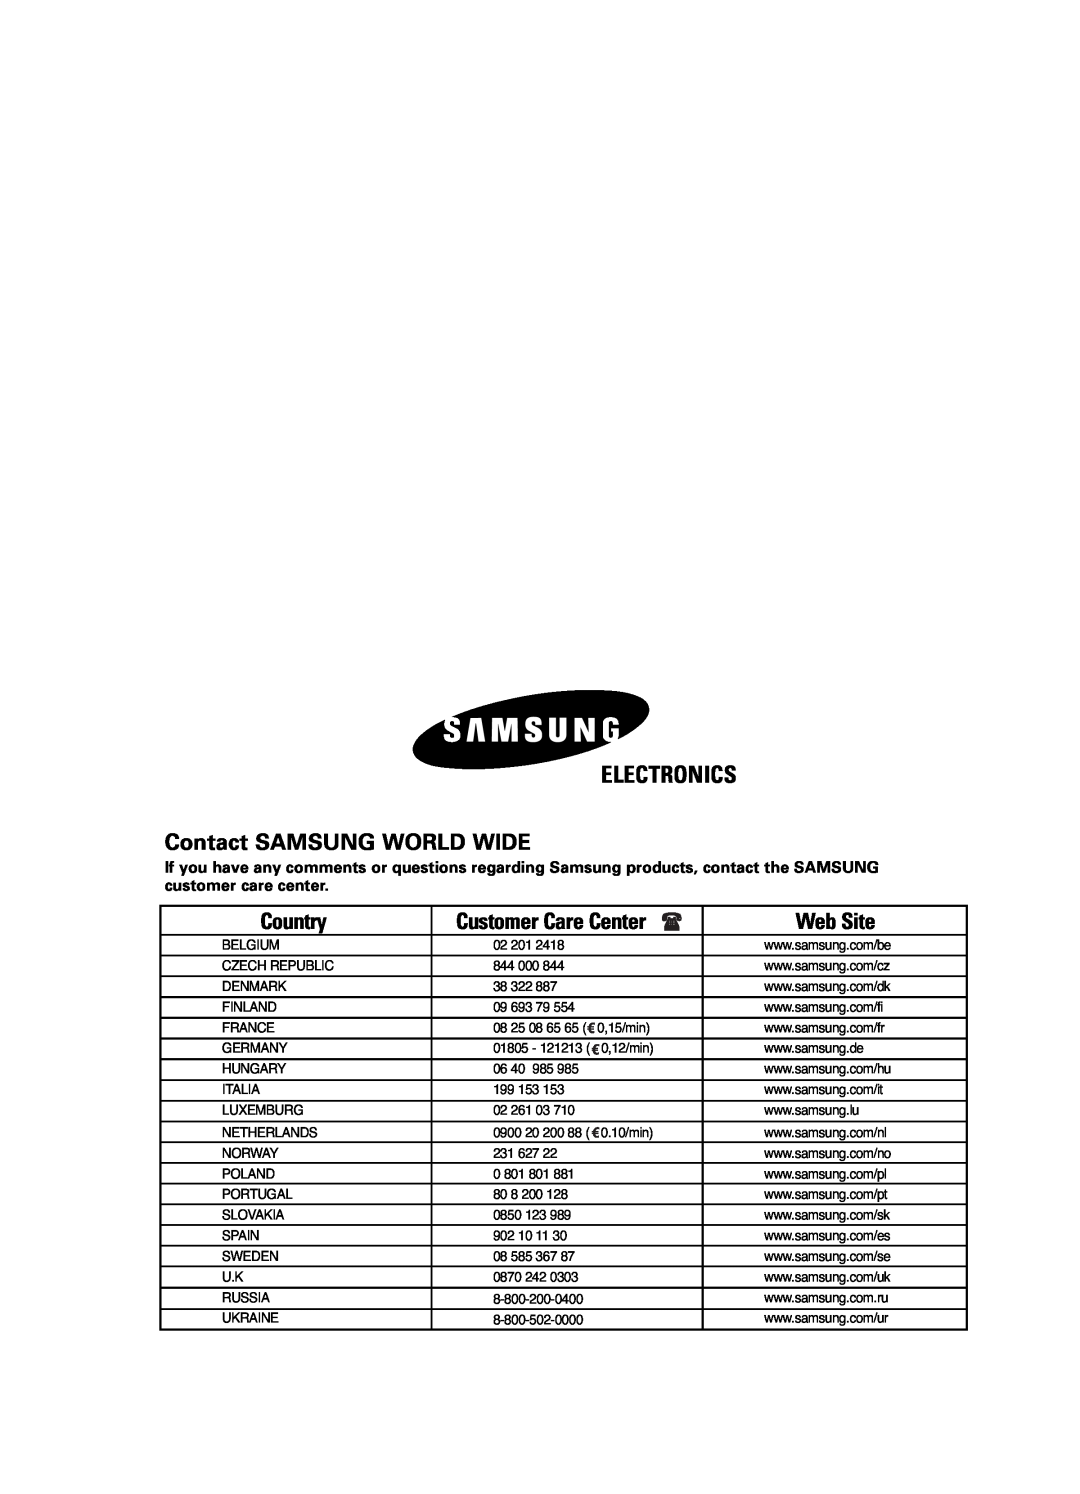 Samsung AVMHH(C) user manual Electronics, Contact SAMSUNG WORLD WIDE, Country, Customer Care Center, Web Site 